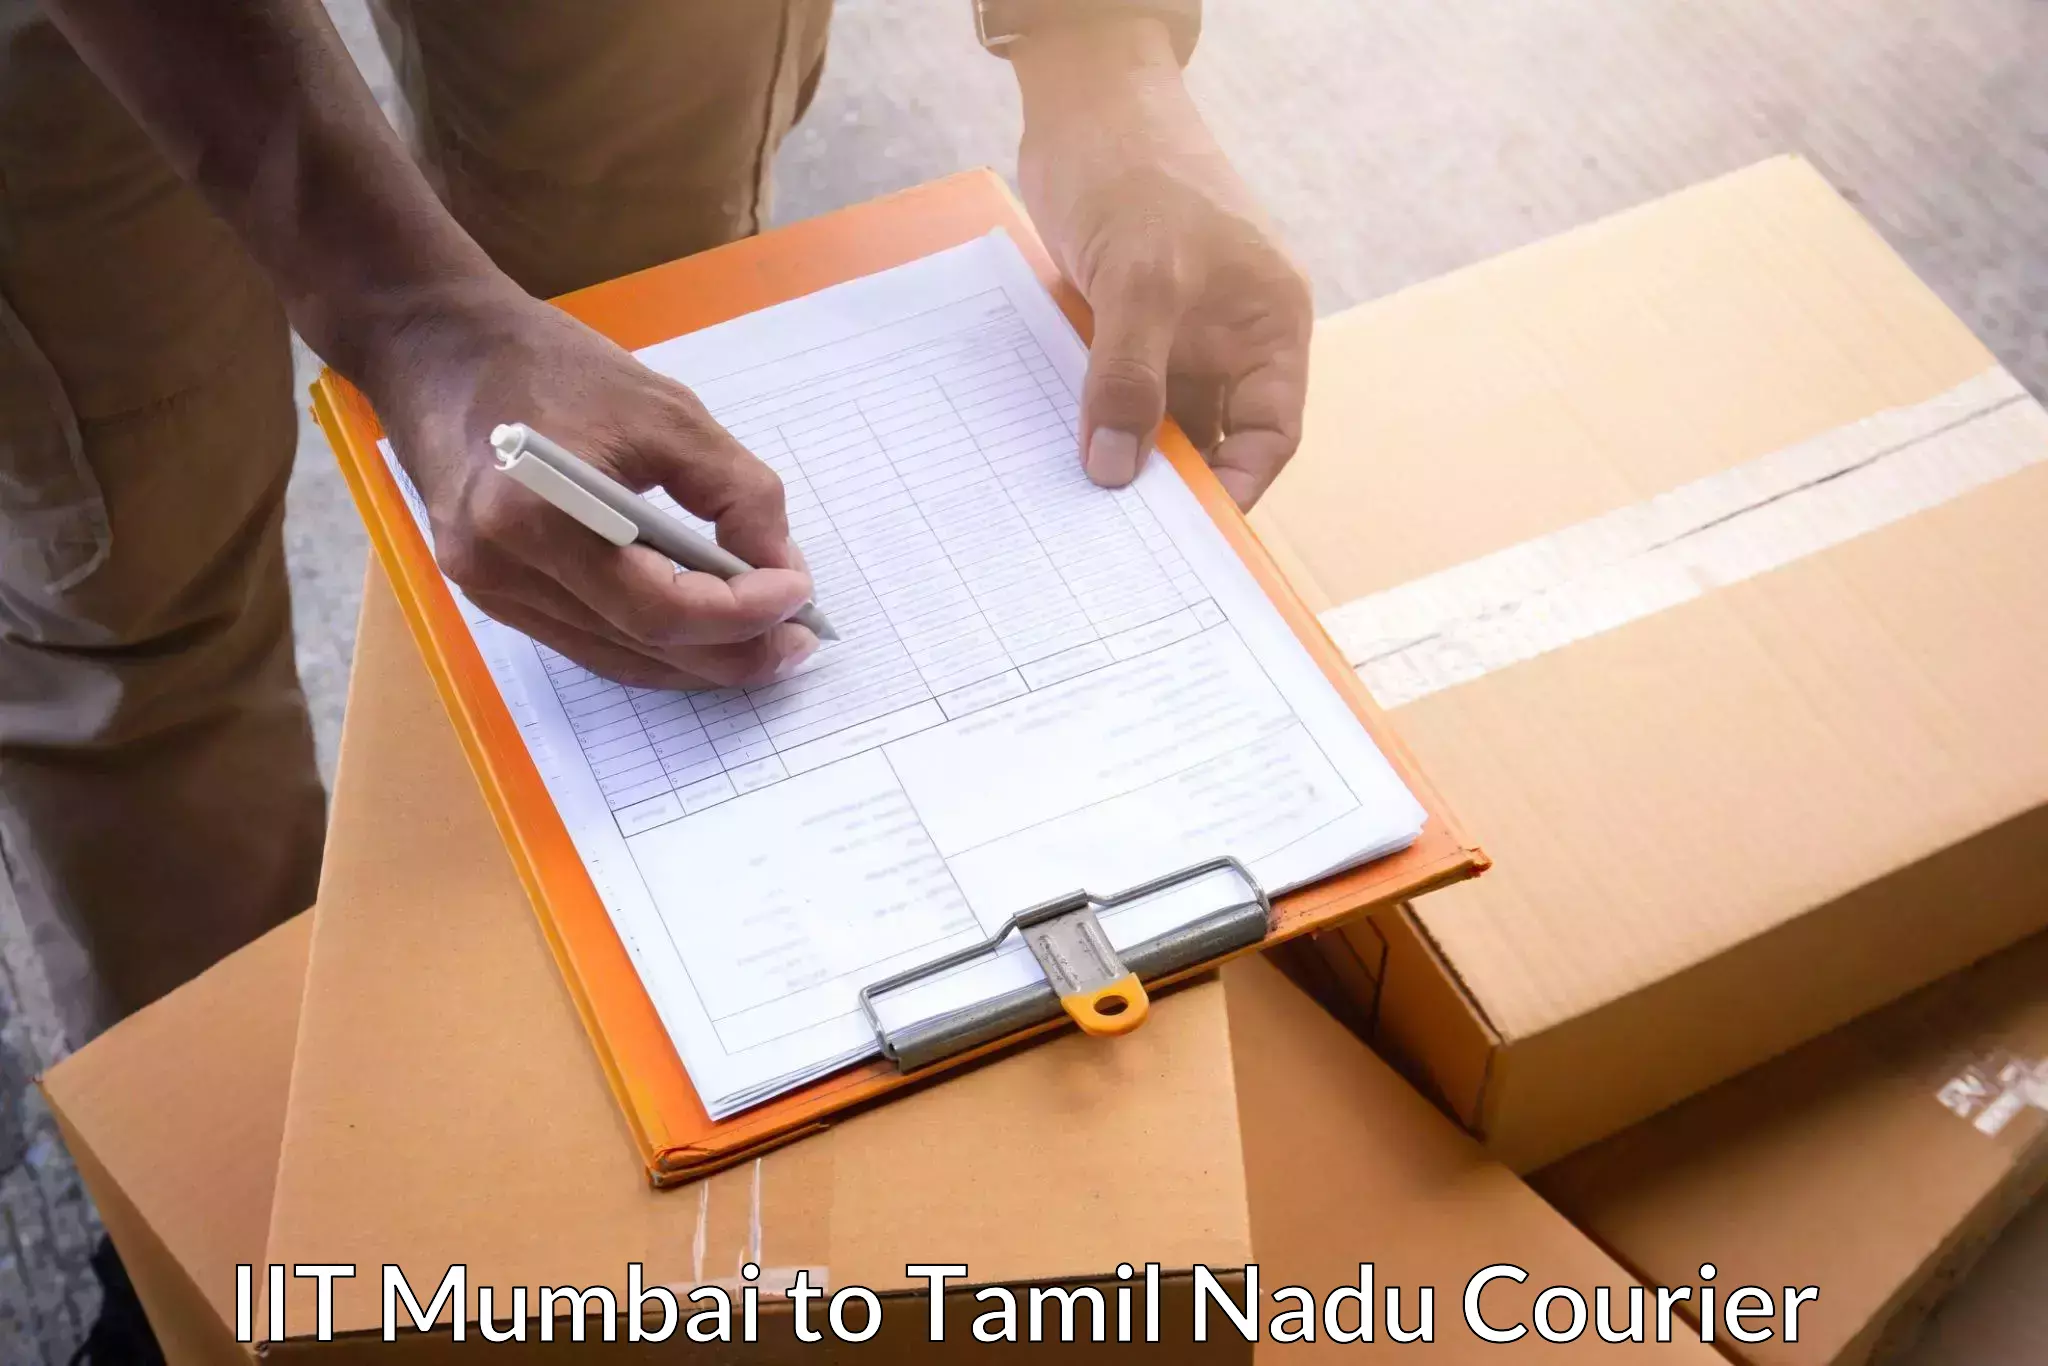 Nationwide delivery network in IIT Mumbai to Cuddalore